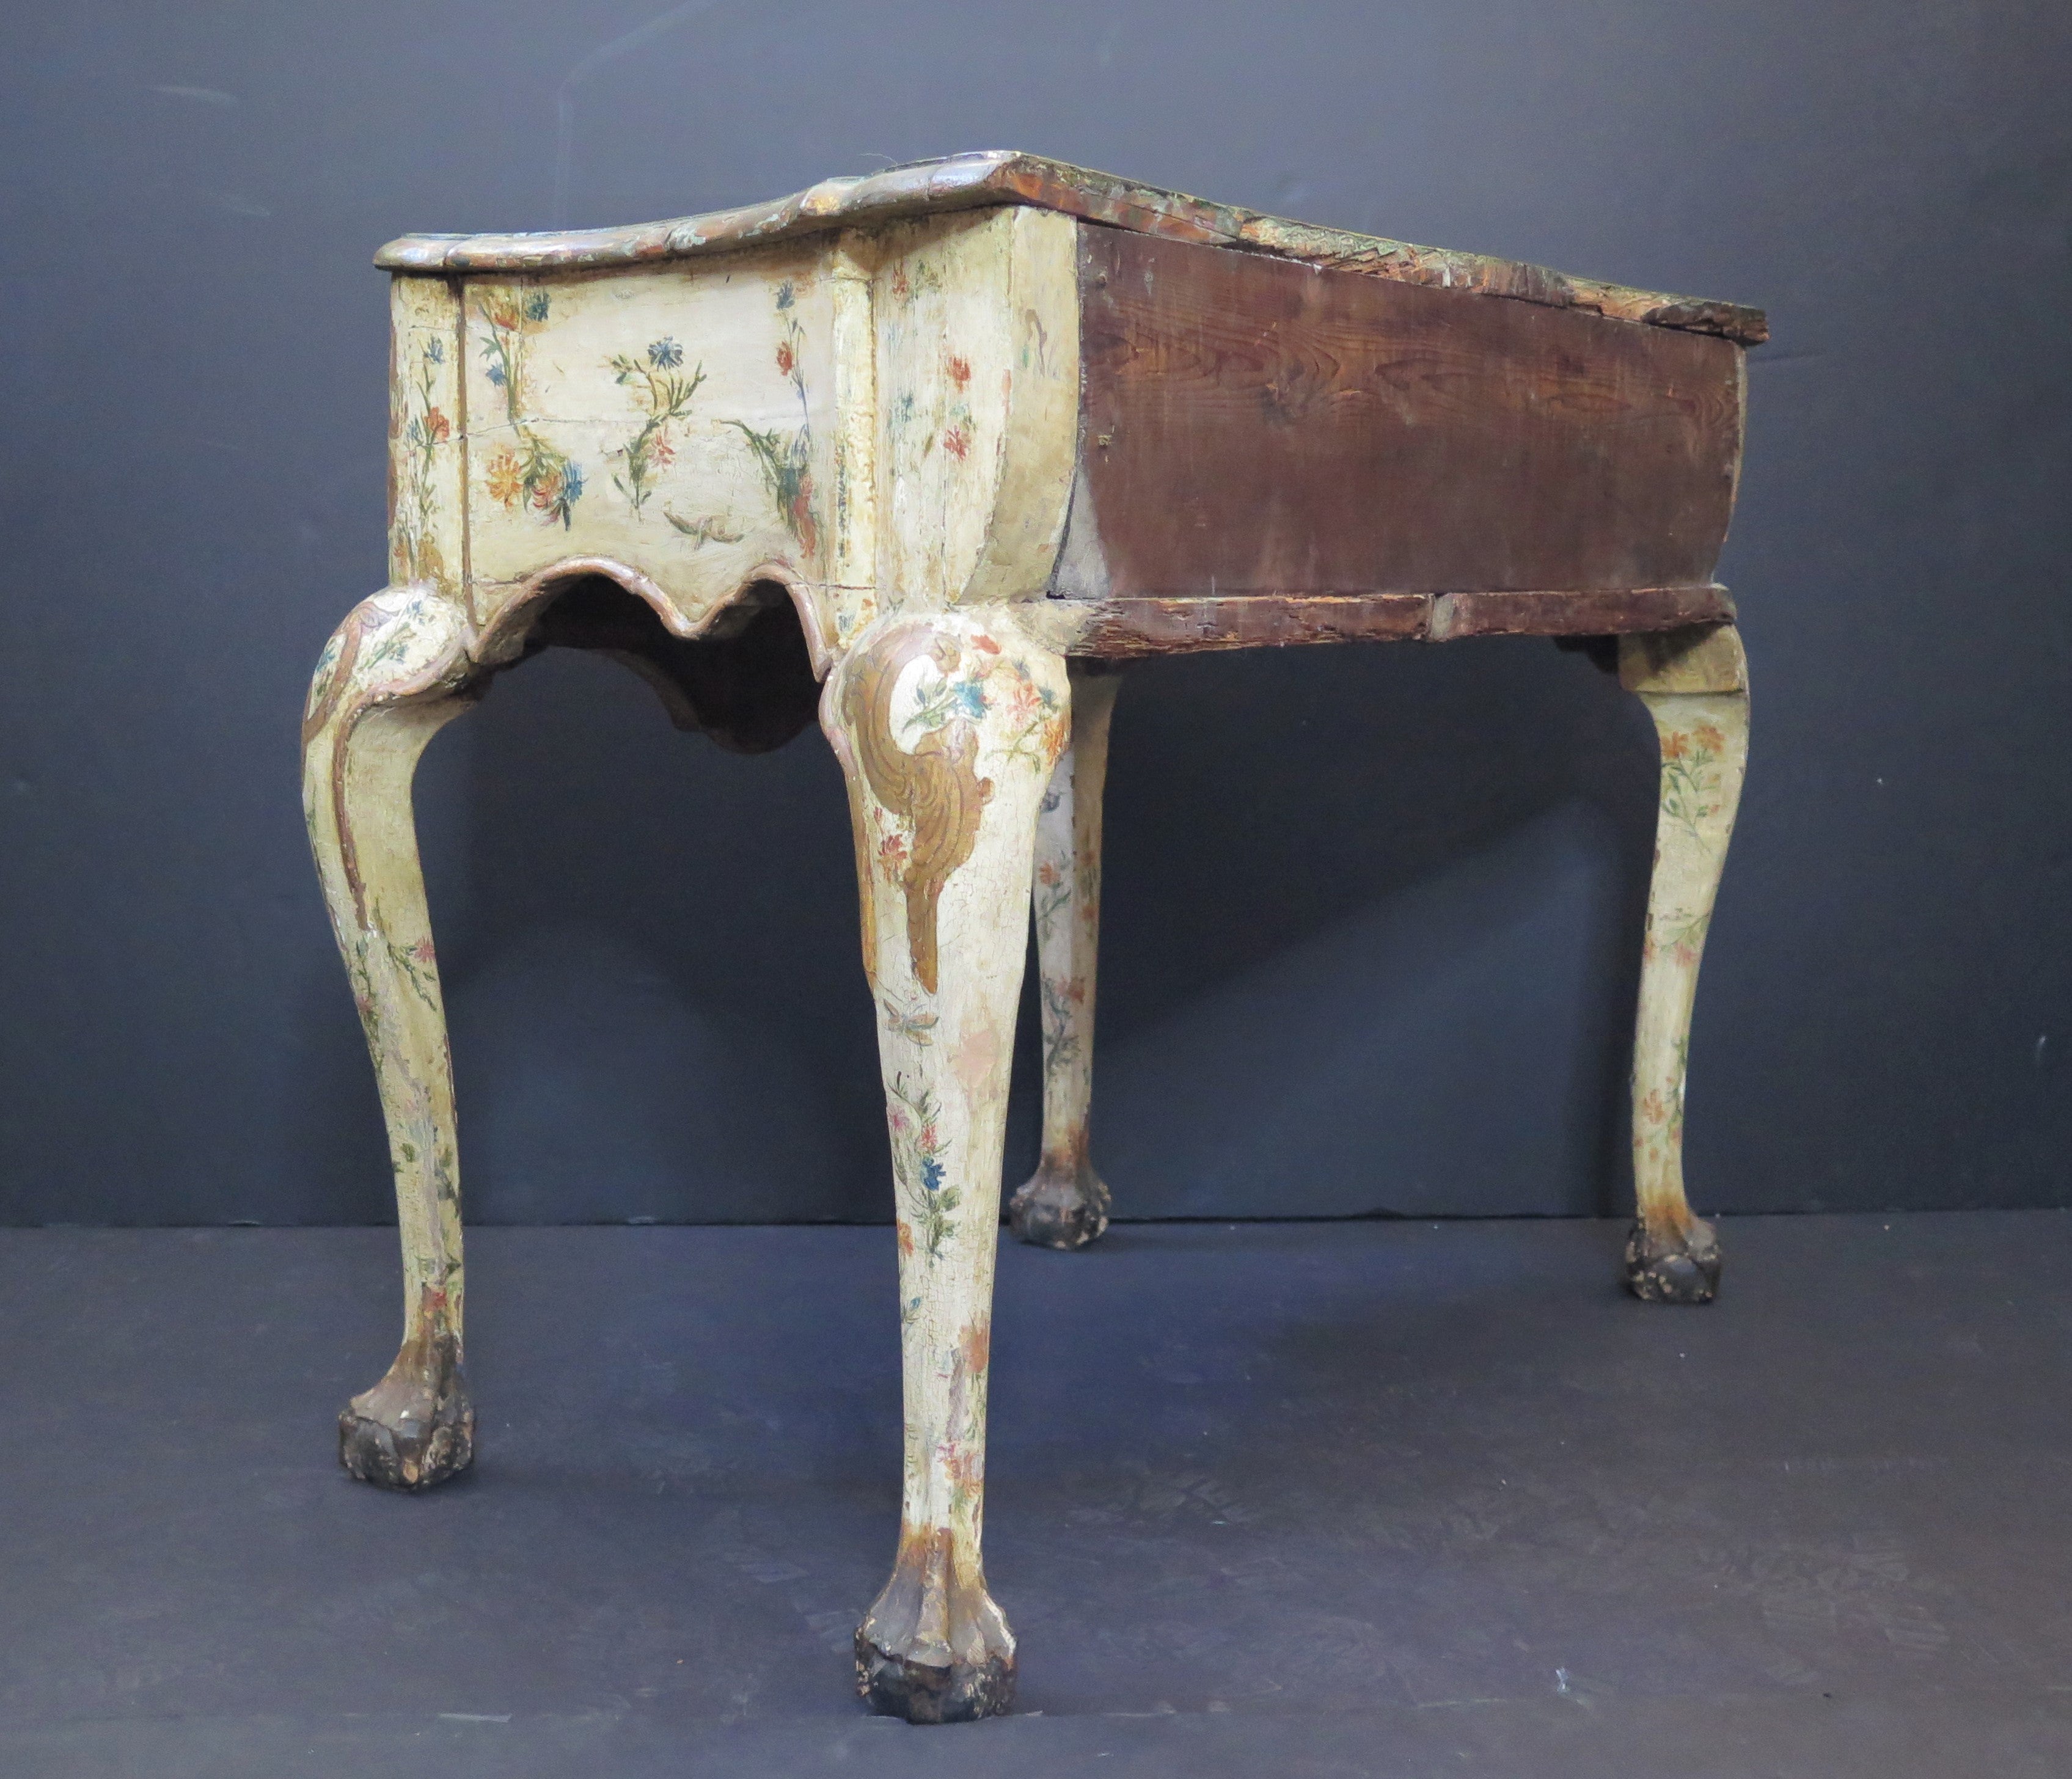 An Early 18th Century Italian Painted Side Table, Circa 1720